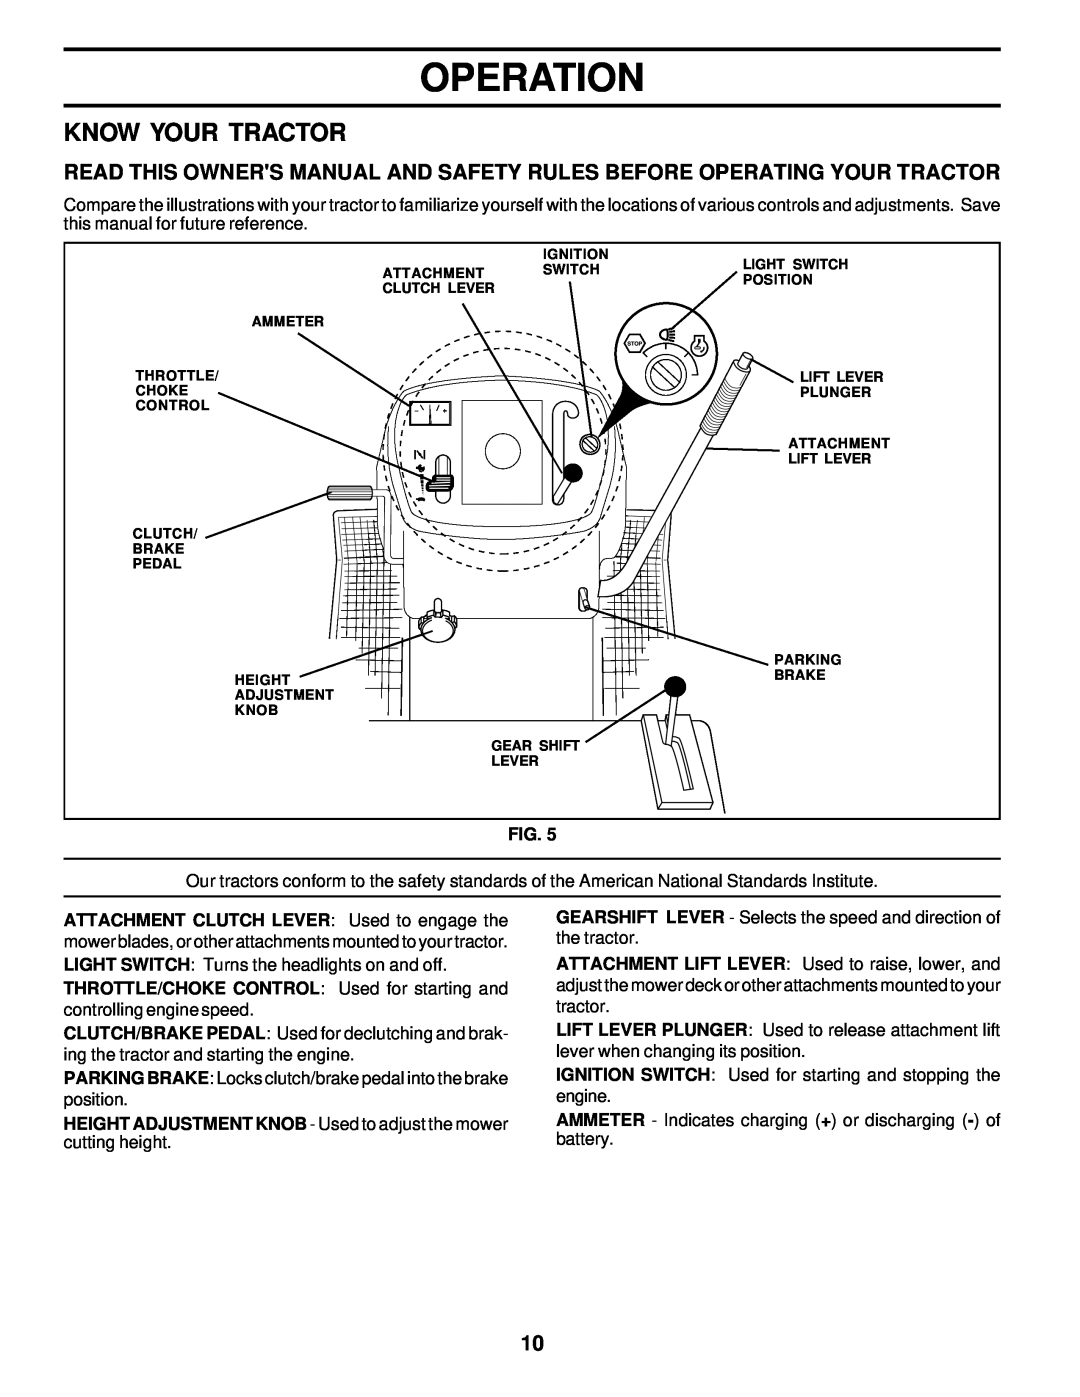 Poulan 177545 owner manual Know Your Tractor, Operation, HEIGHT ADJUSTMENT KNOB - Used to adjust the mower cutting height 